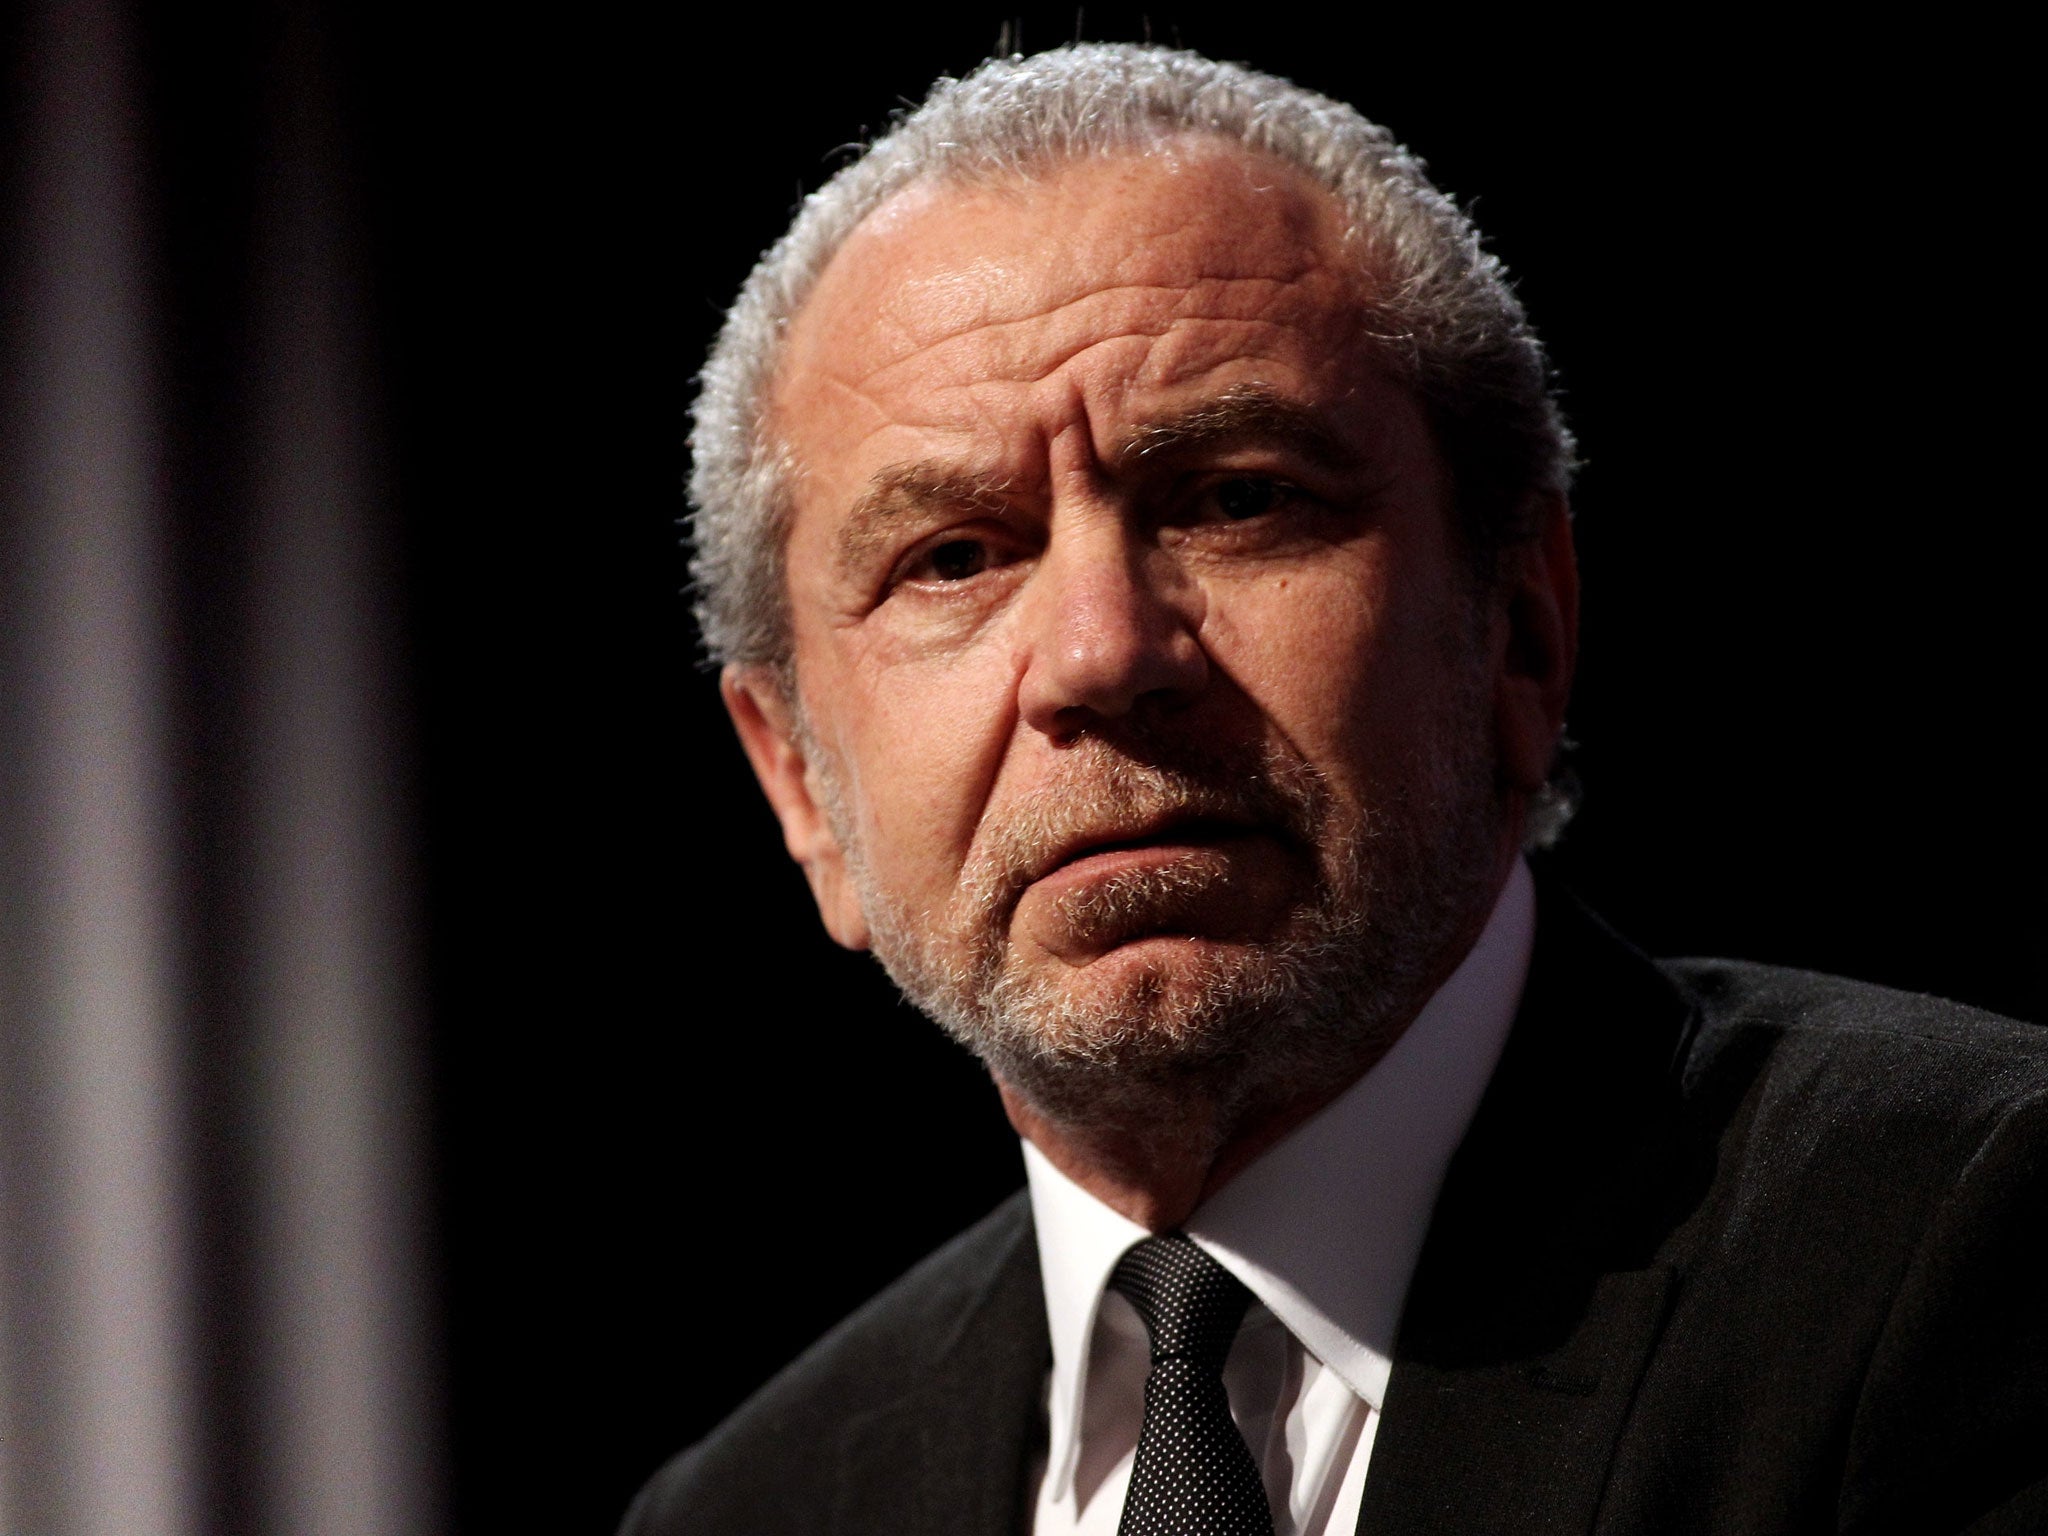 Lord Sugar sits in the House of Lords